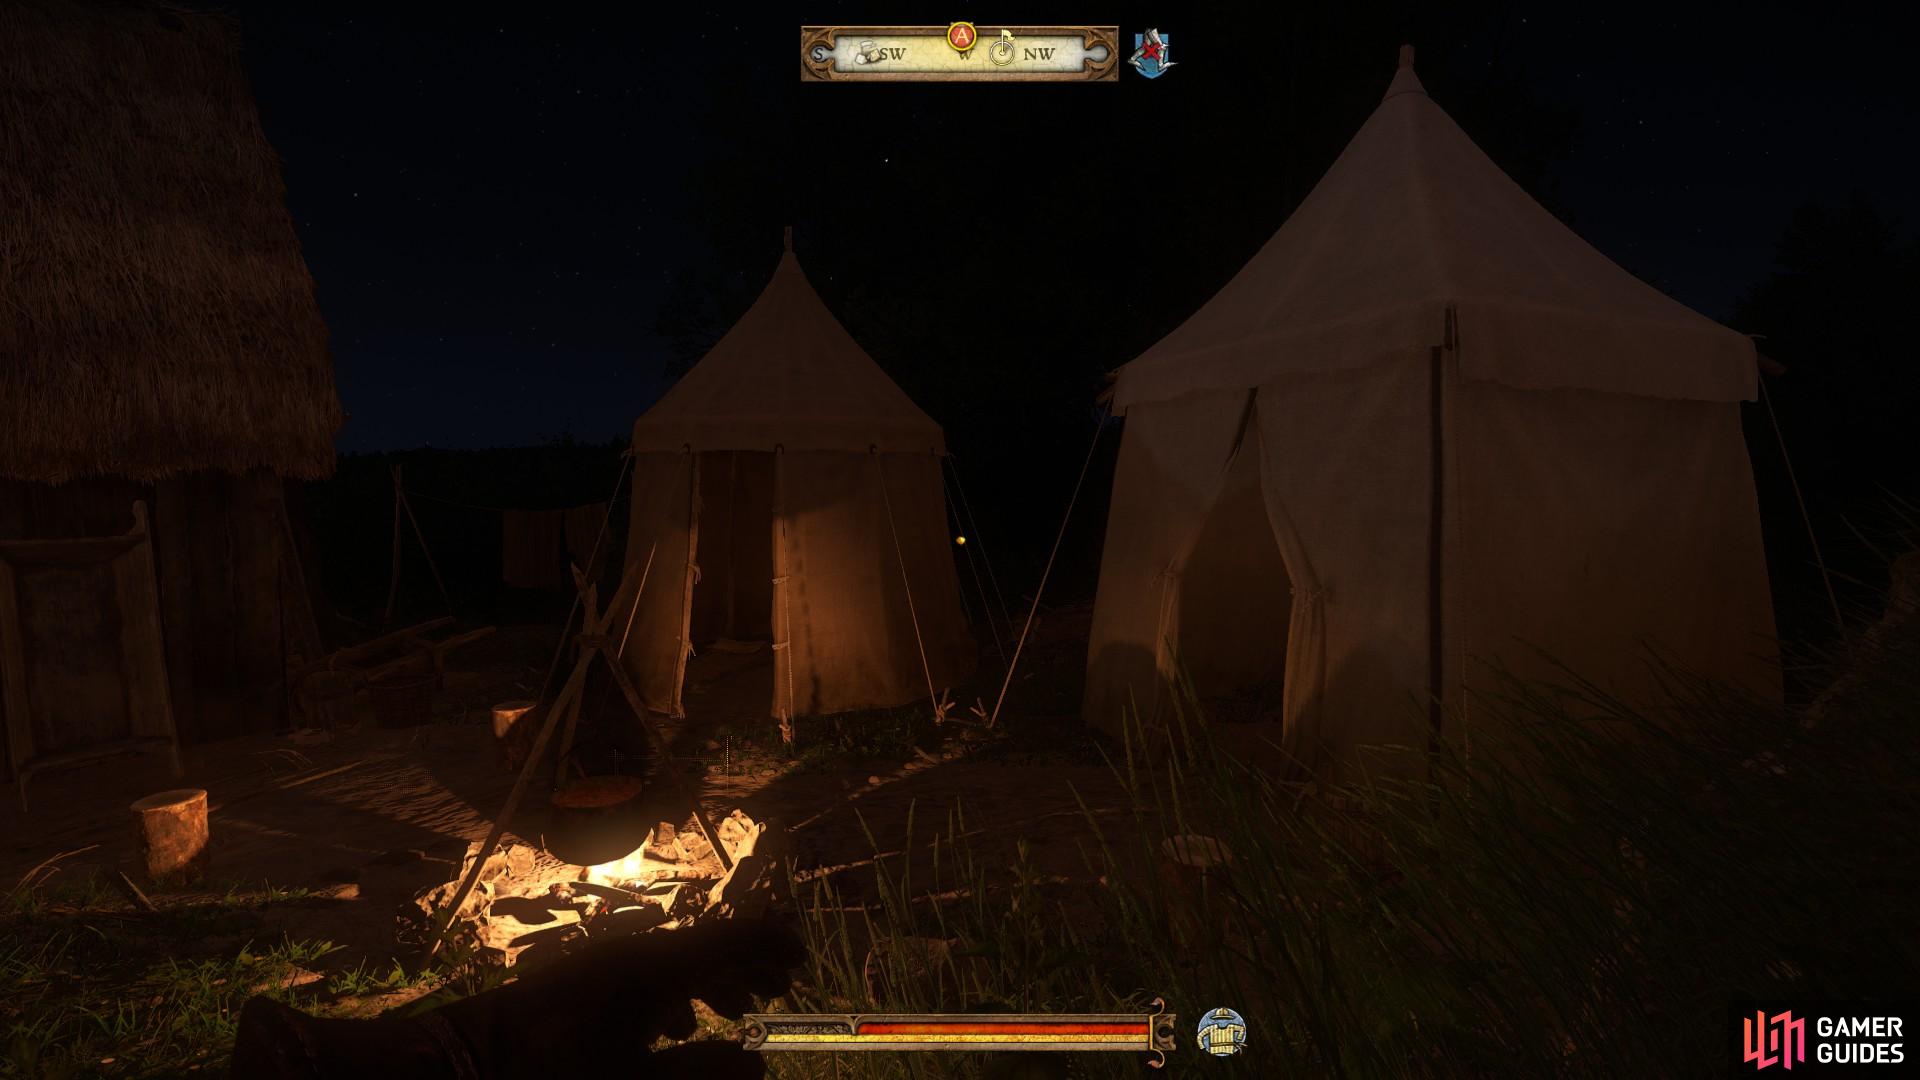 The executioner’s sword can be found in the small tent on the left.